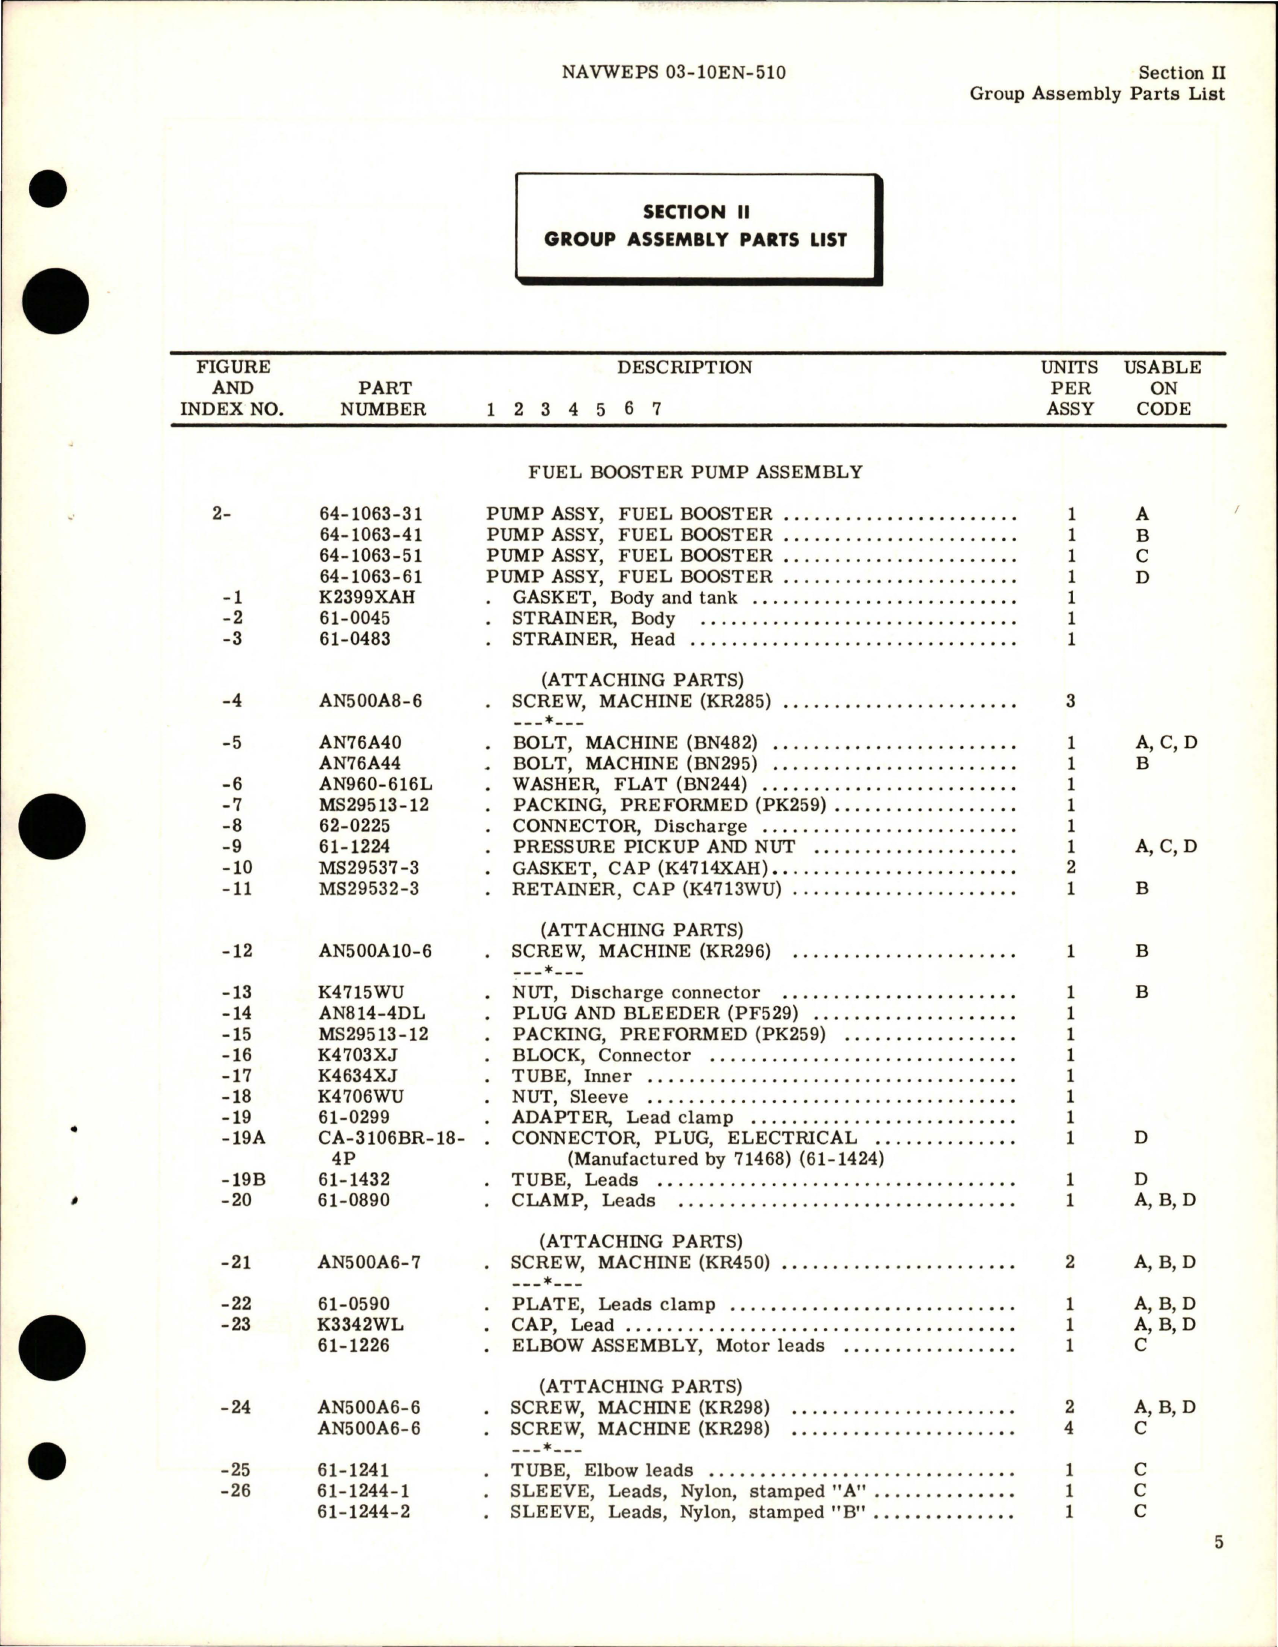 Sample page 7 from AirCorps Library document: Illustrated Parts Breakdown for Fuel Booster Pumps 